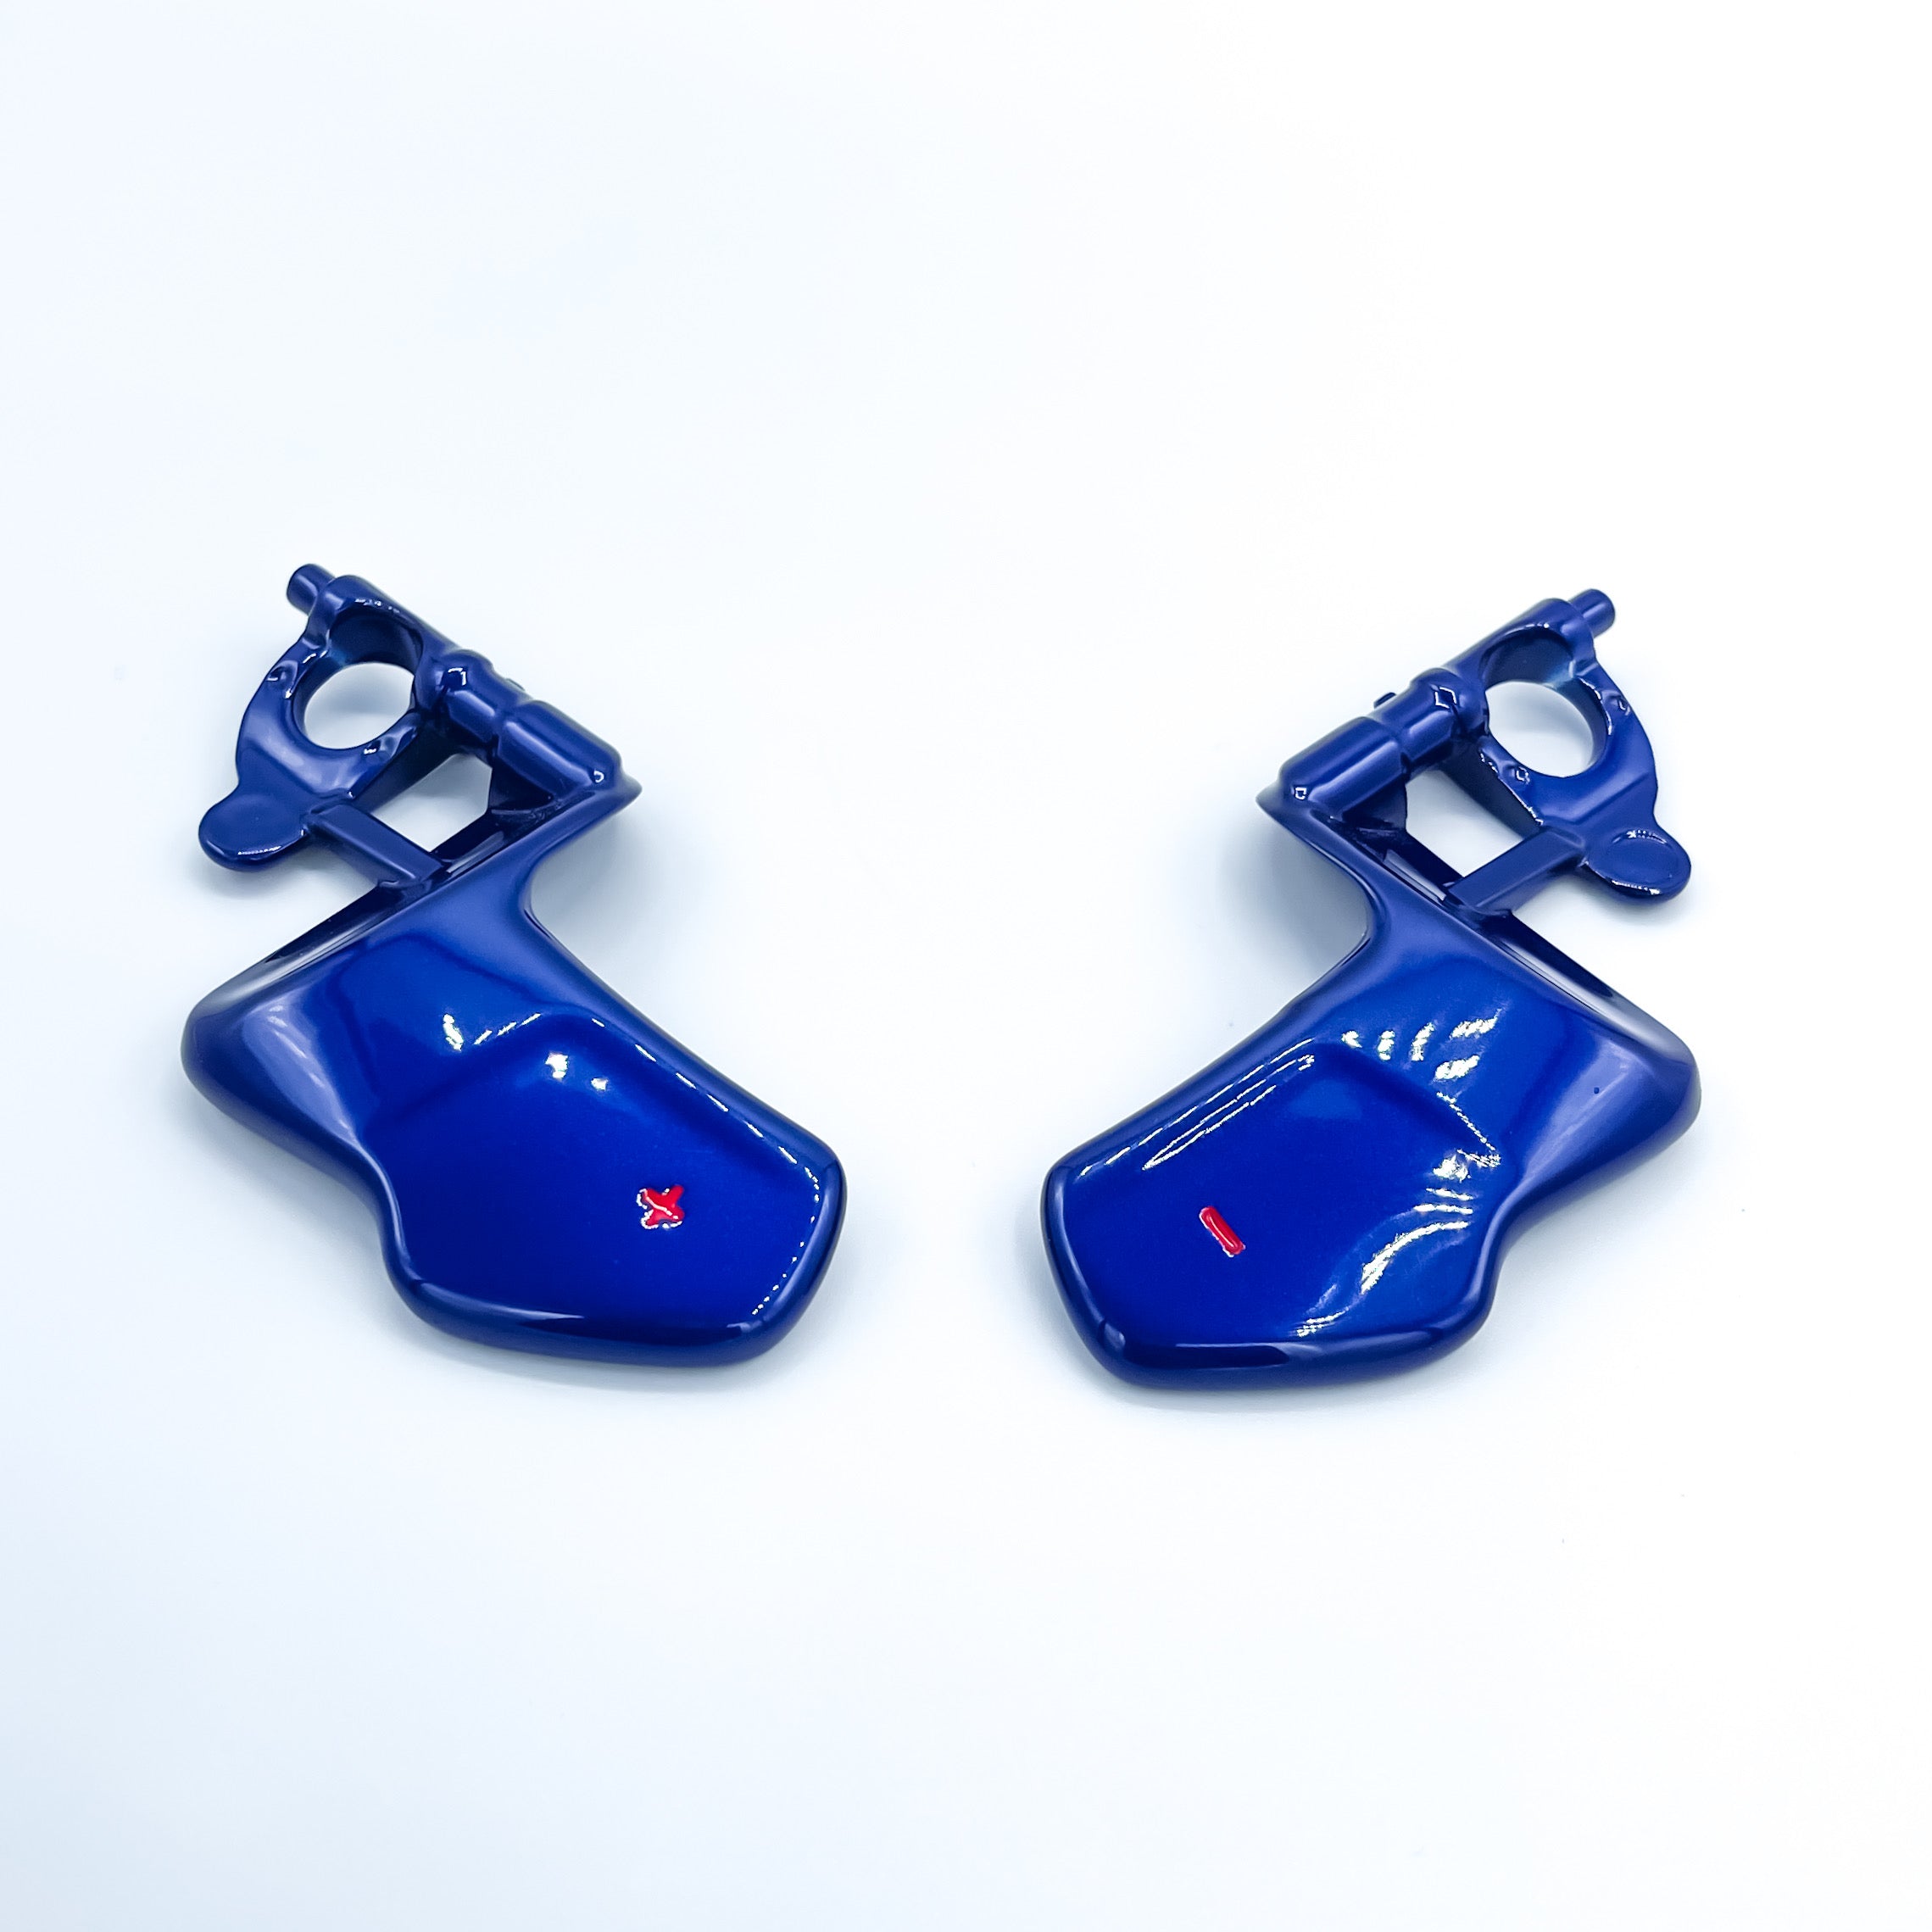 Painted Paddle Shifters